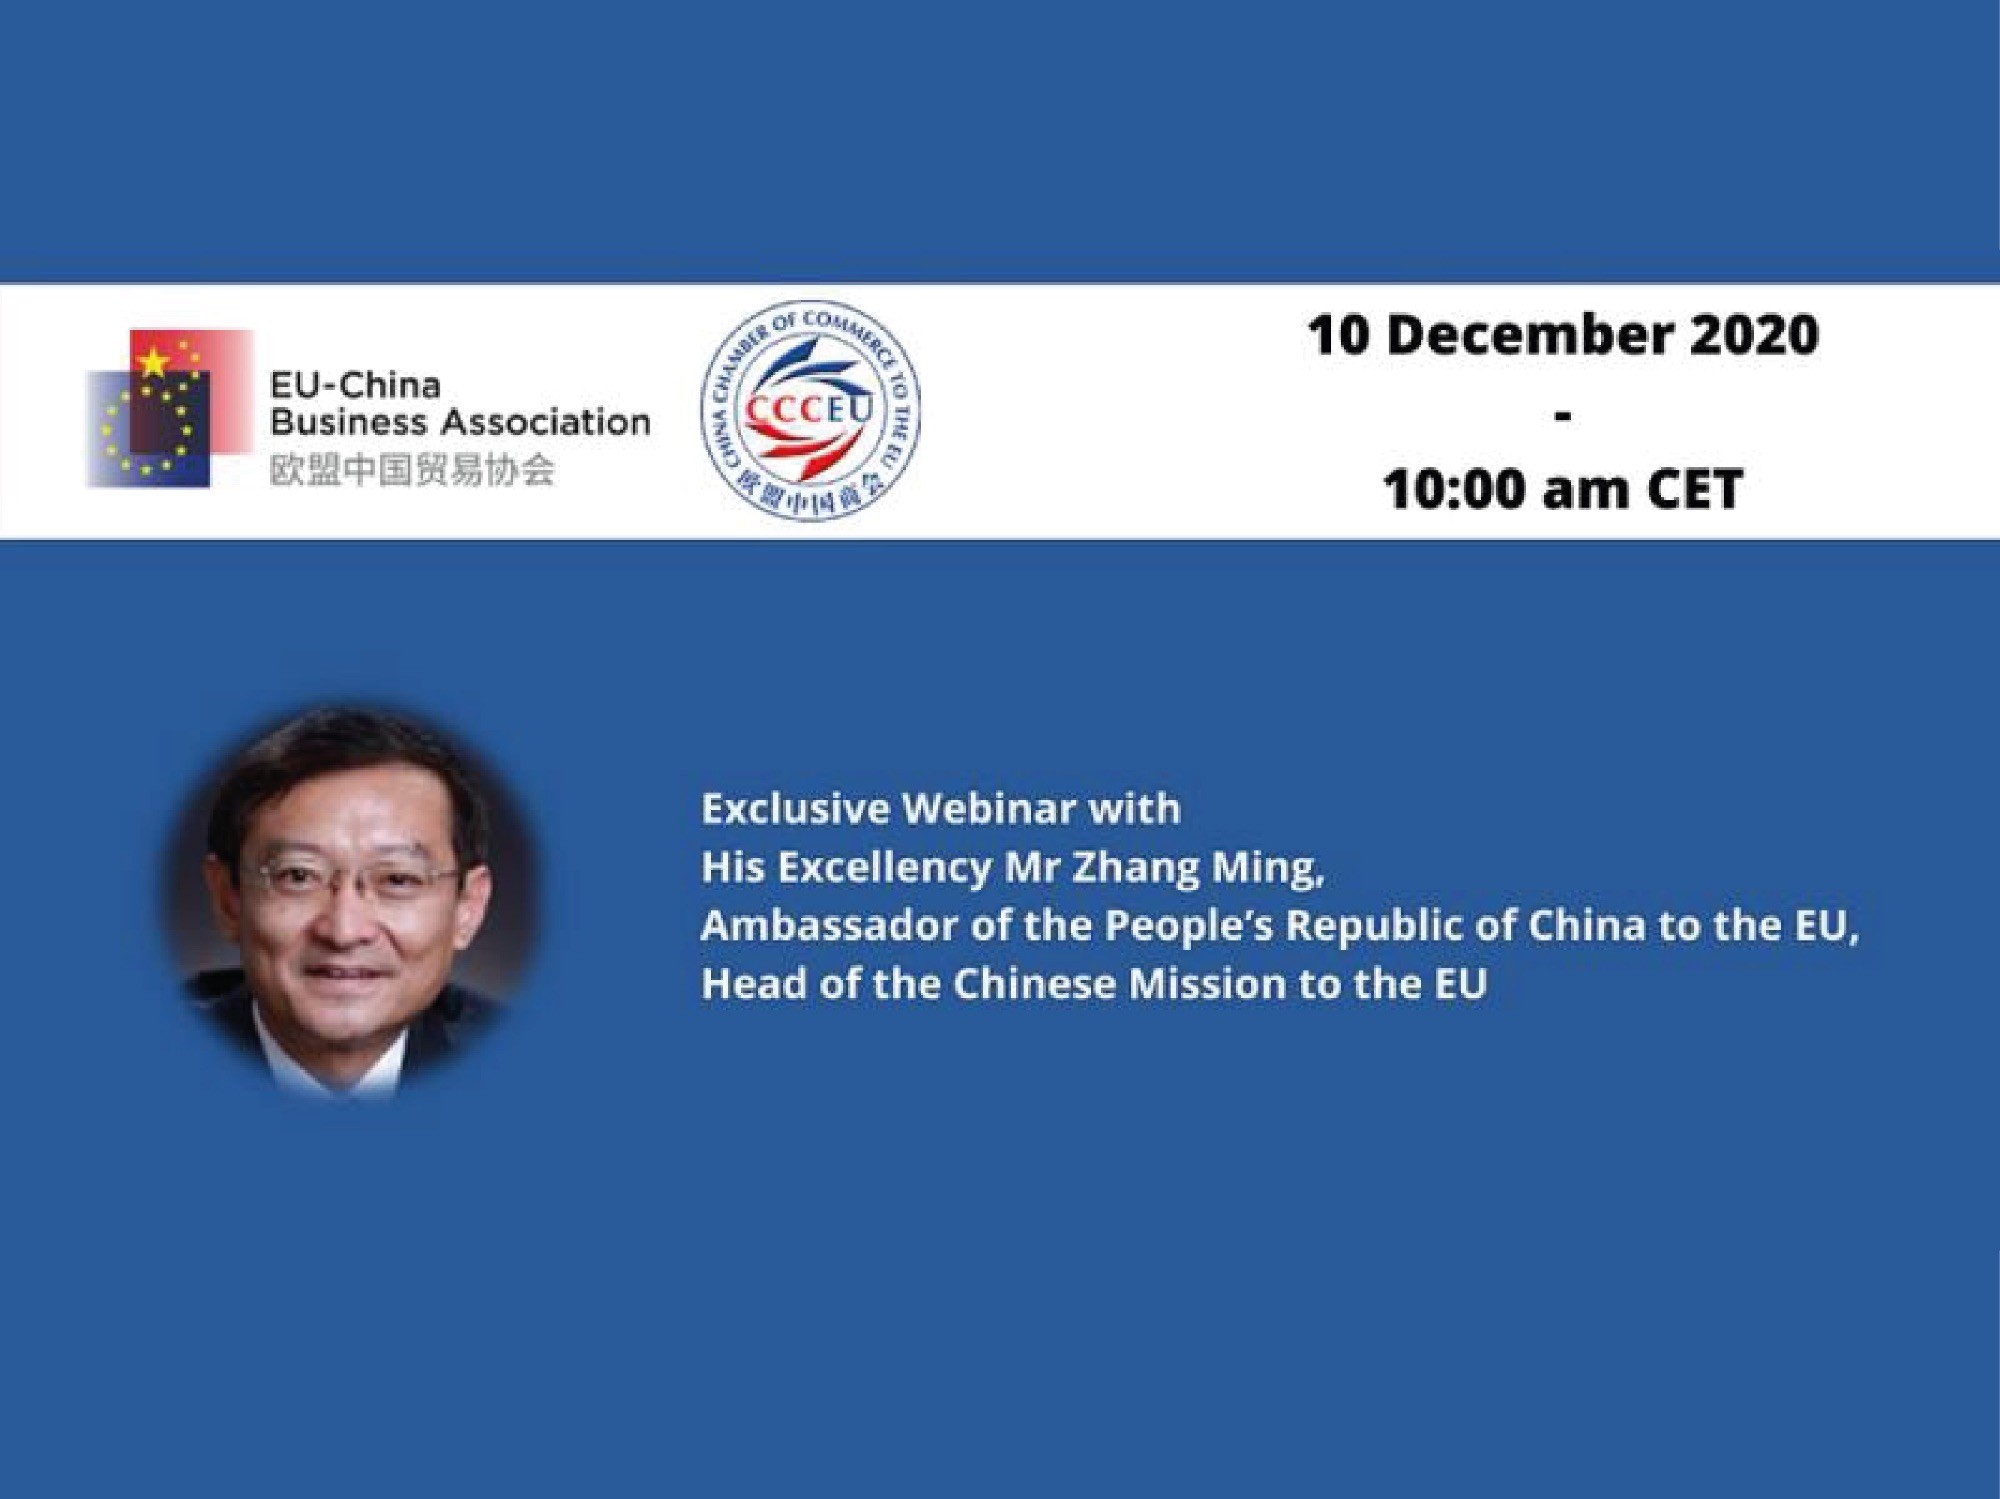 Exclusive Webinar: H.E. Mr Zhang Ming, Ambassador of the People's Republic of China to the EU